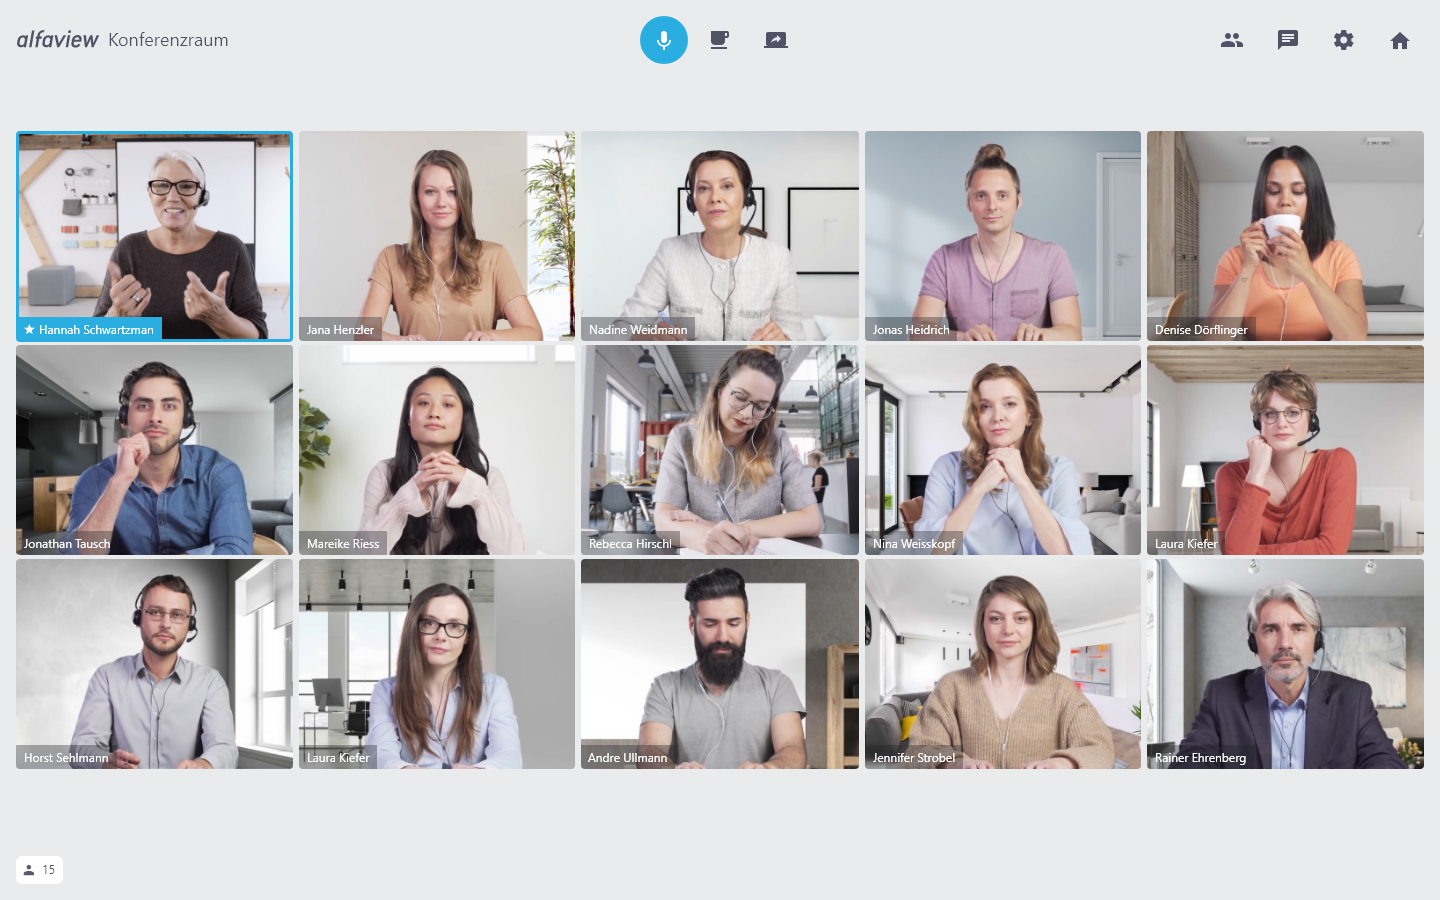 Alfaview brings forth a German competitor to the world of videoconferencing